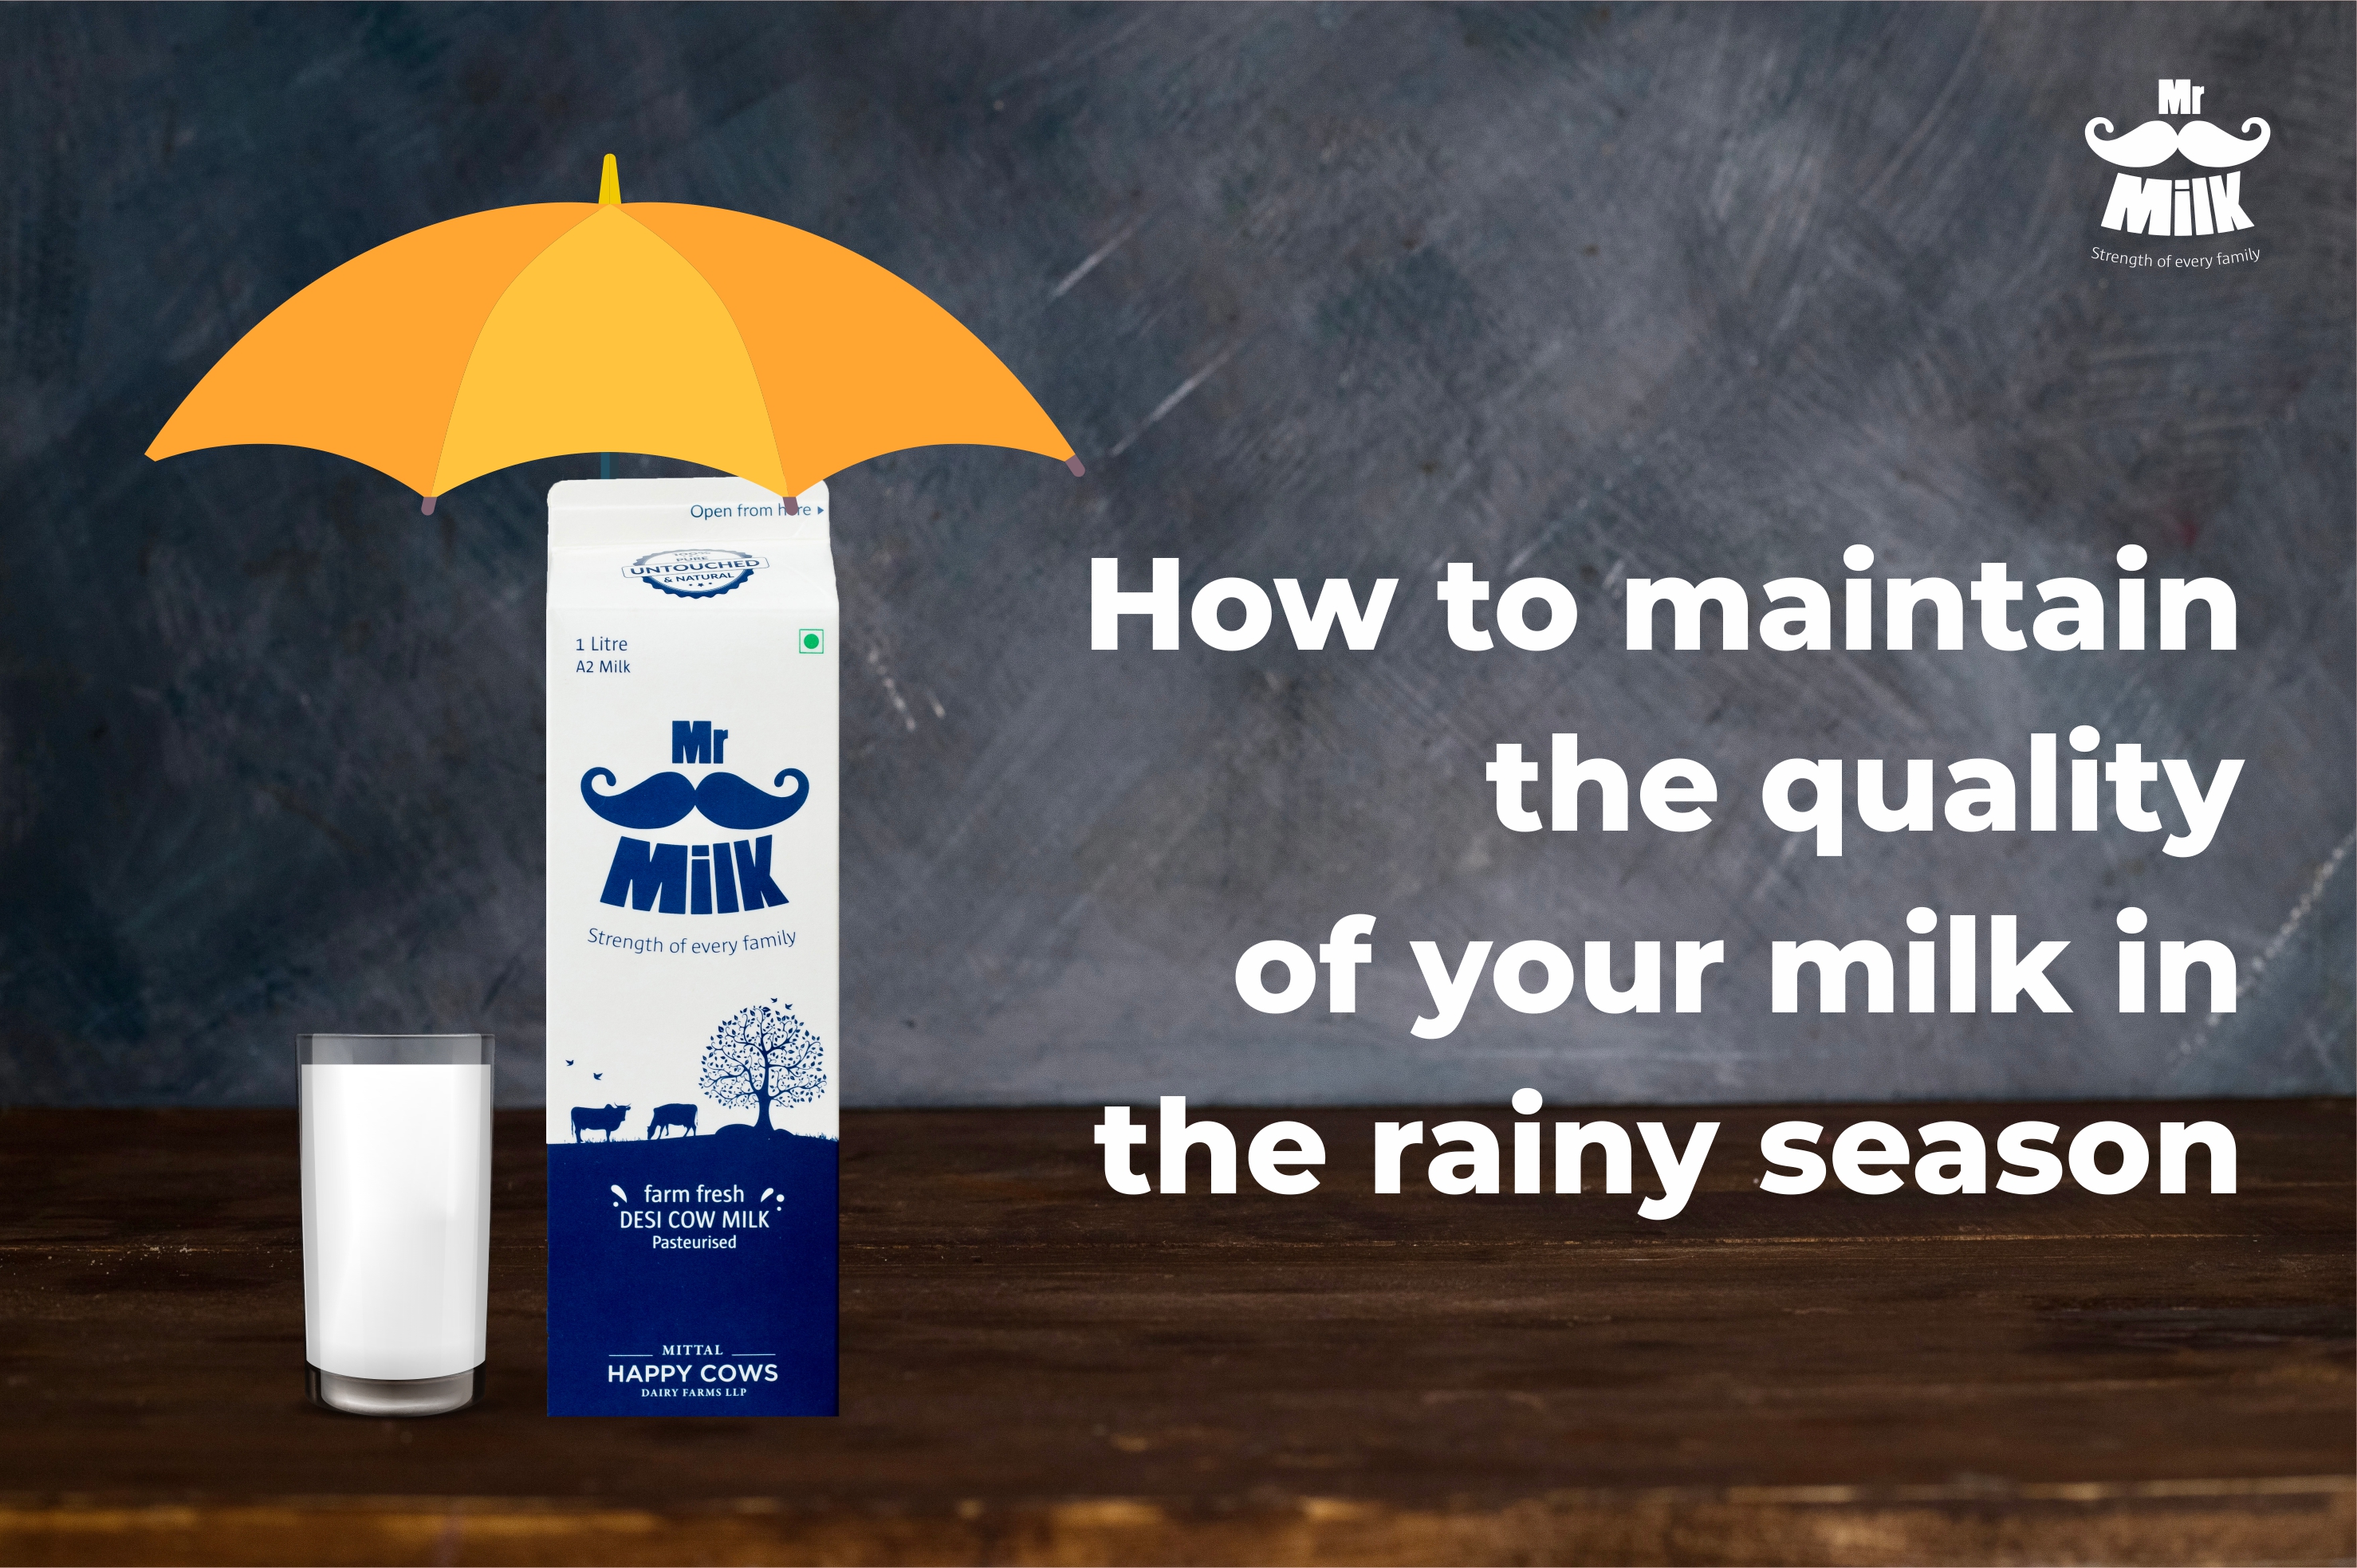 How To Maintain The Quality Of Your Milk In The Rainy Season.